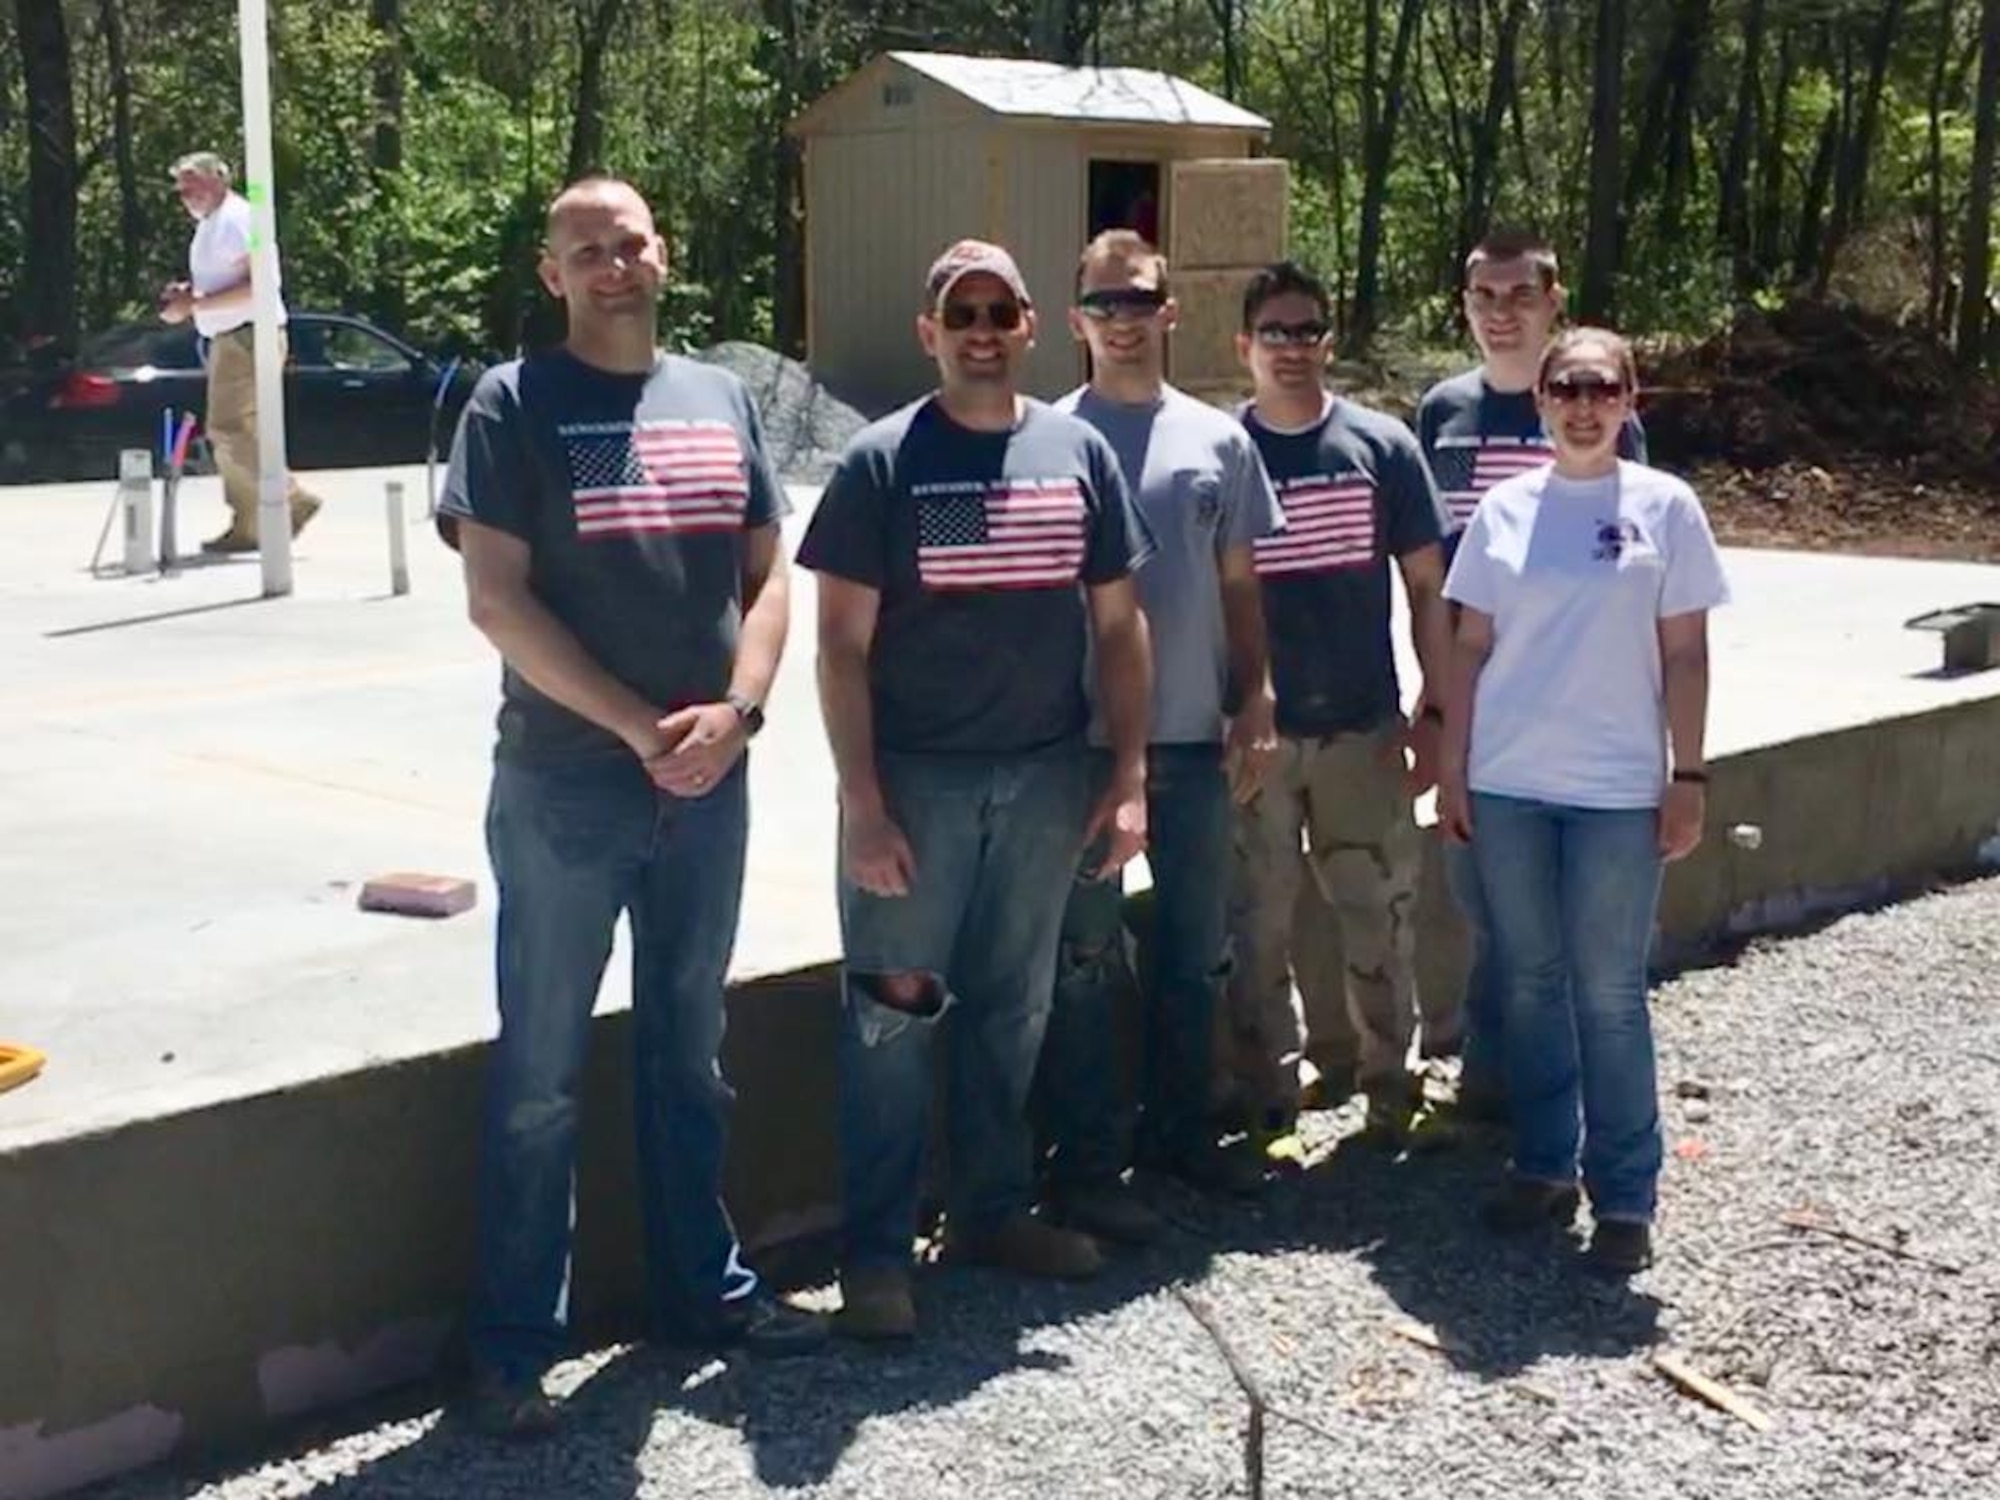 Arnold Air Force Base Company Grade Officer Council members take a photo break. Members of the CGOC recently volunteered with Rutherford County Area Habitat for Humanity and worked on two homes the Habitat is constructing in the area. Pictured from left are 2nd Lt. Jonathan Teer, 2nd Lt. Ryan Boudreaux, Capt. Jonathan Dias, Capt. Michael Davault, 1st Lt. Adam McKenzie and 1st Lt. Karlie Madden.